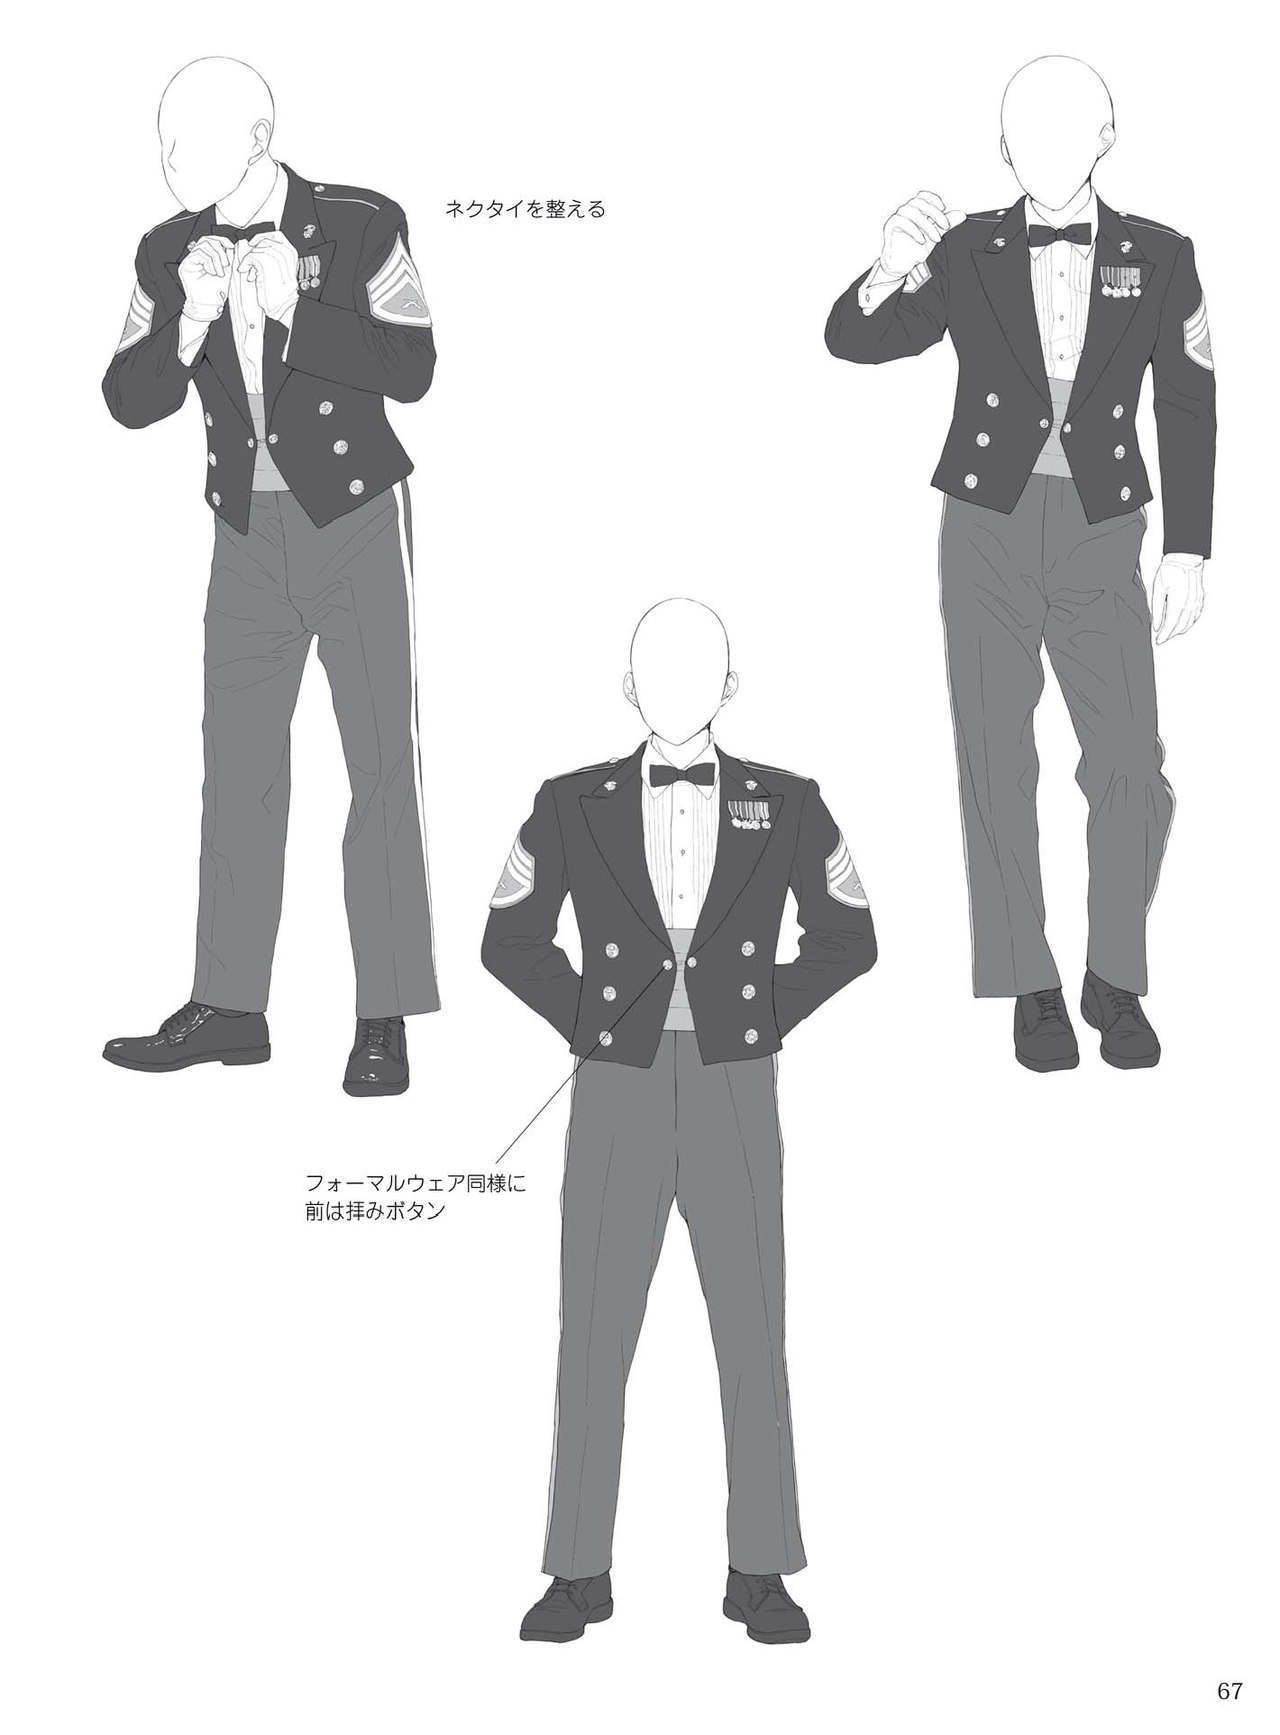 How to draw military uniforms and uniforms From Self-Defense Forces 軍服・制服の描き方 アメリカ軍・自衛隊の制服から戦闘服まで 70